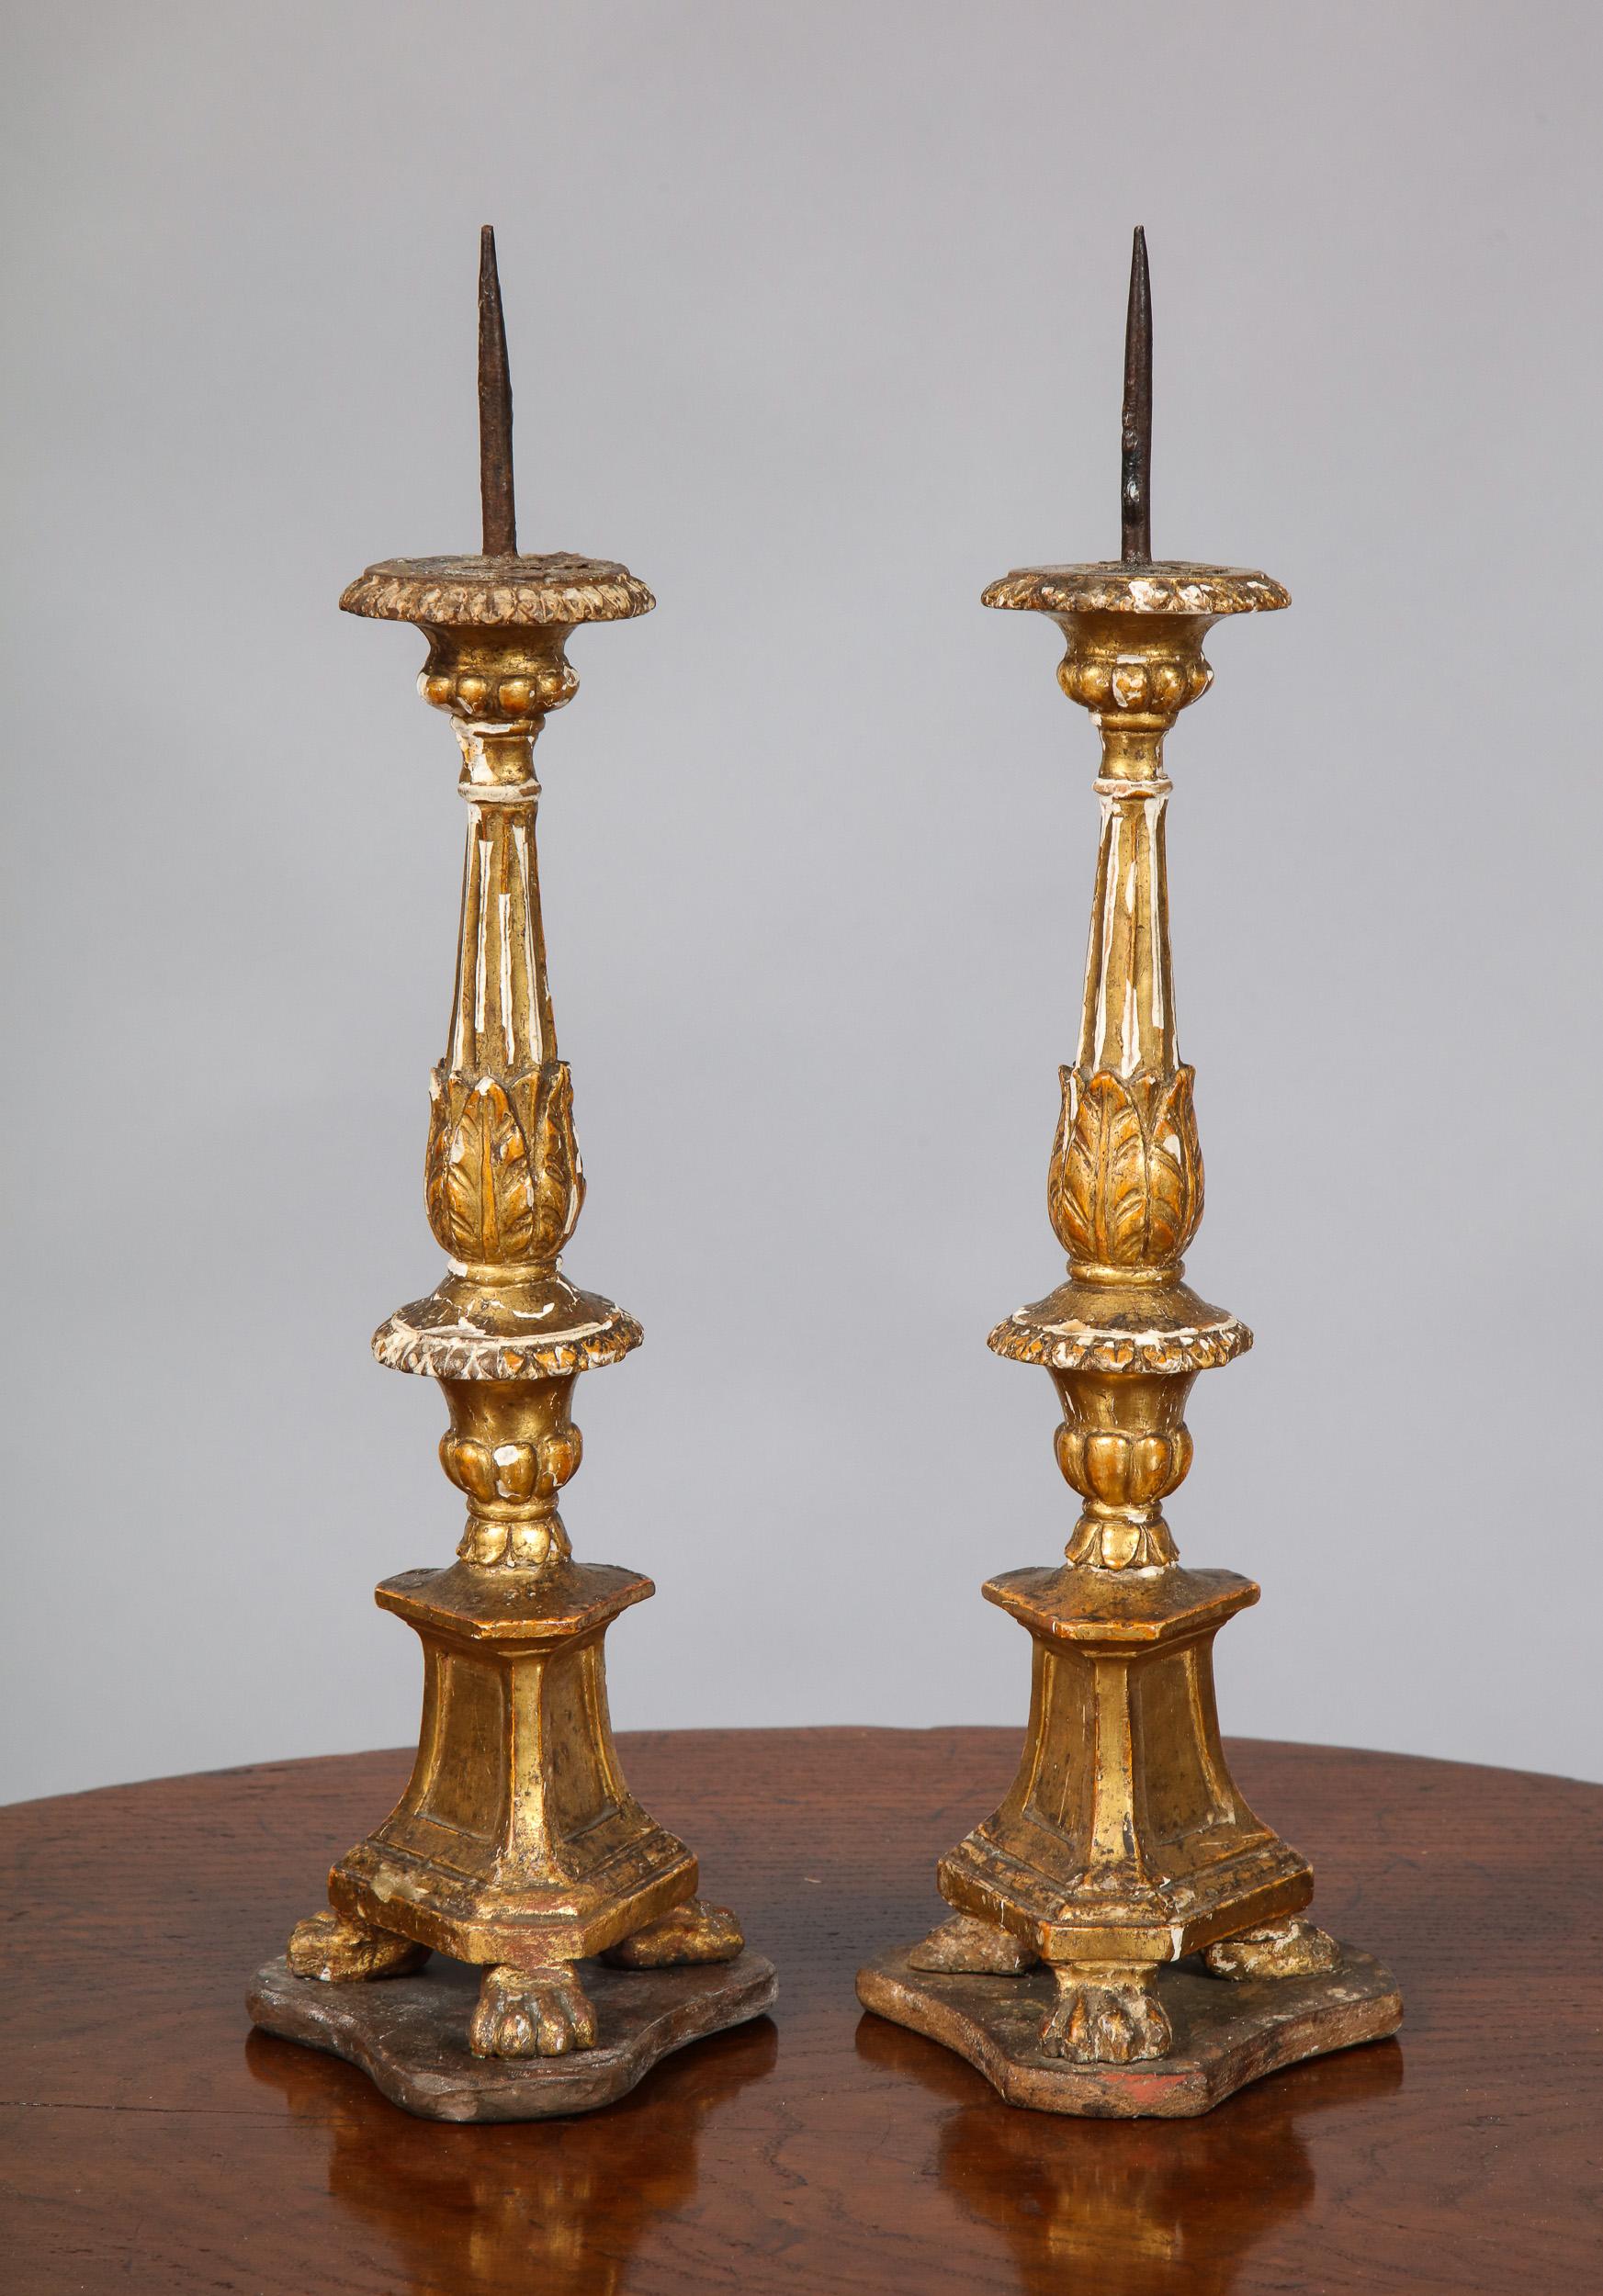 Baroque Pair of Diminutive Giltwood Pricket Candlesticks For Sale